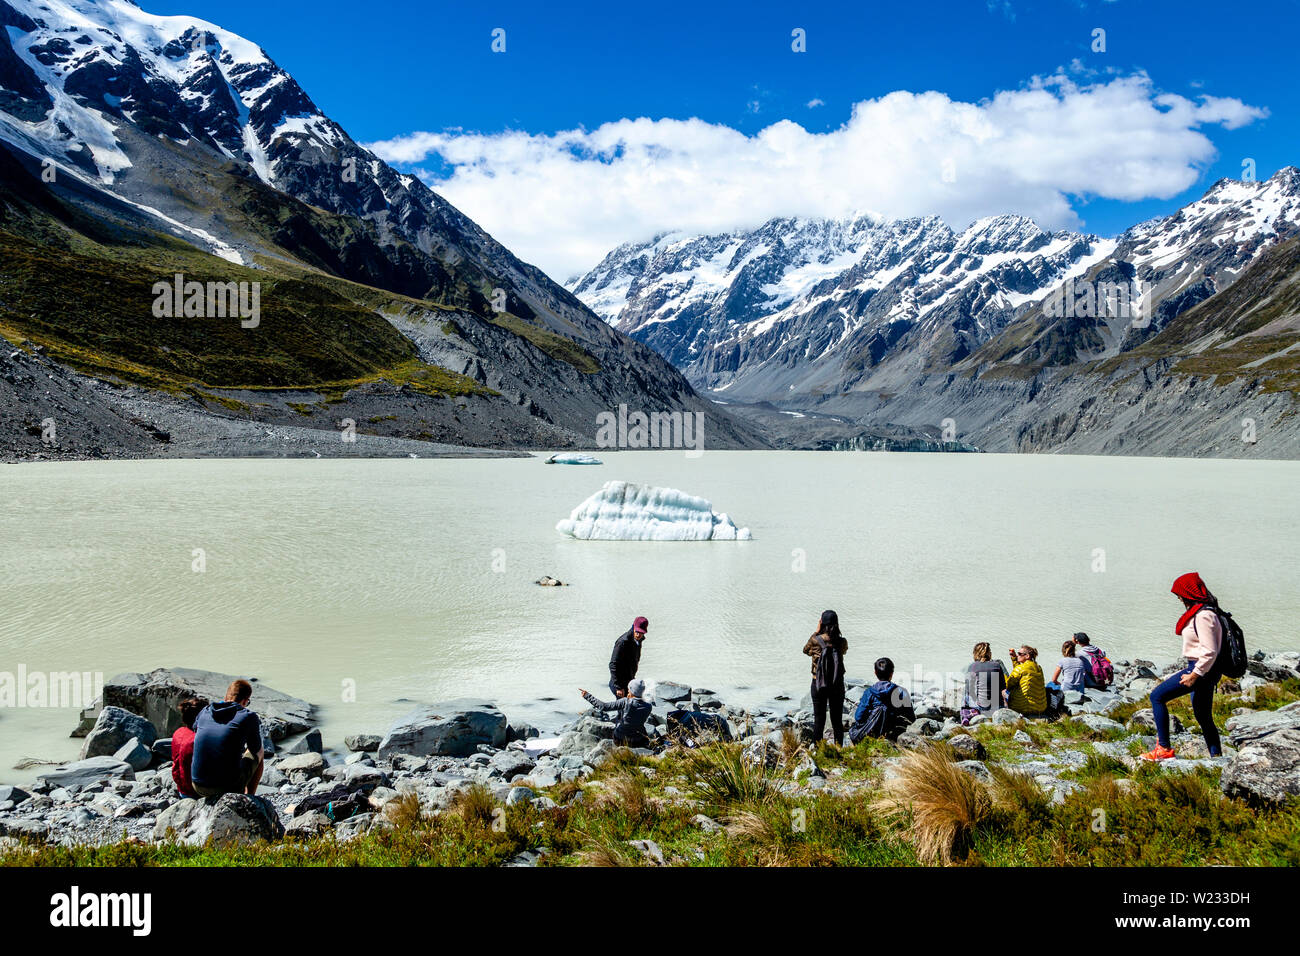 Visitors At Hooker Lake At The End Of The Hooker Valley Track, Aoraki/Mt Cook National Park, South Island, New Zealand Stock Photo